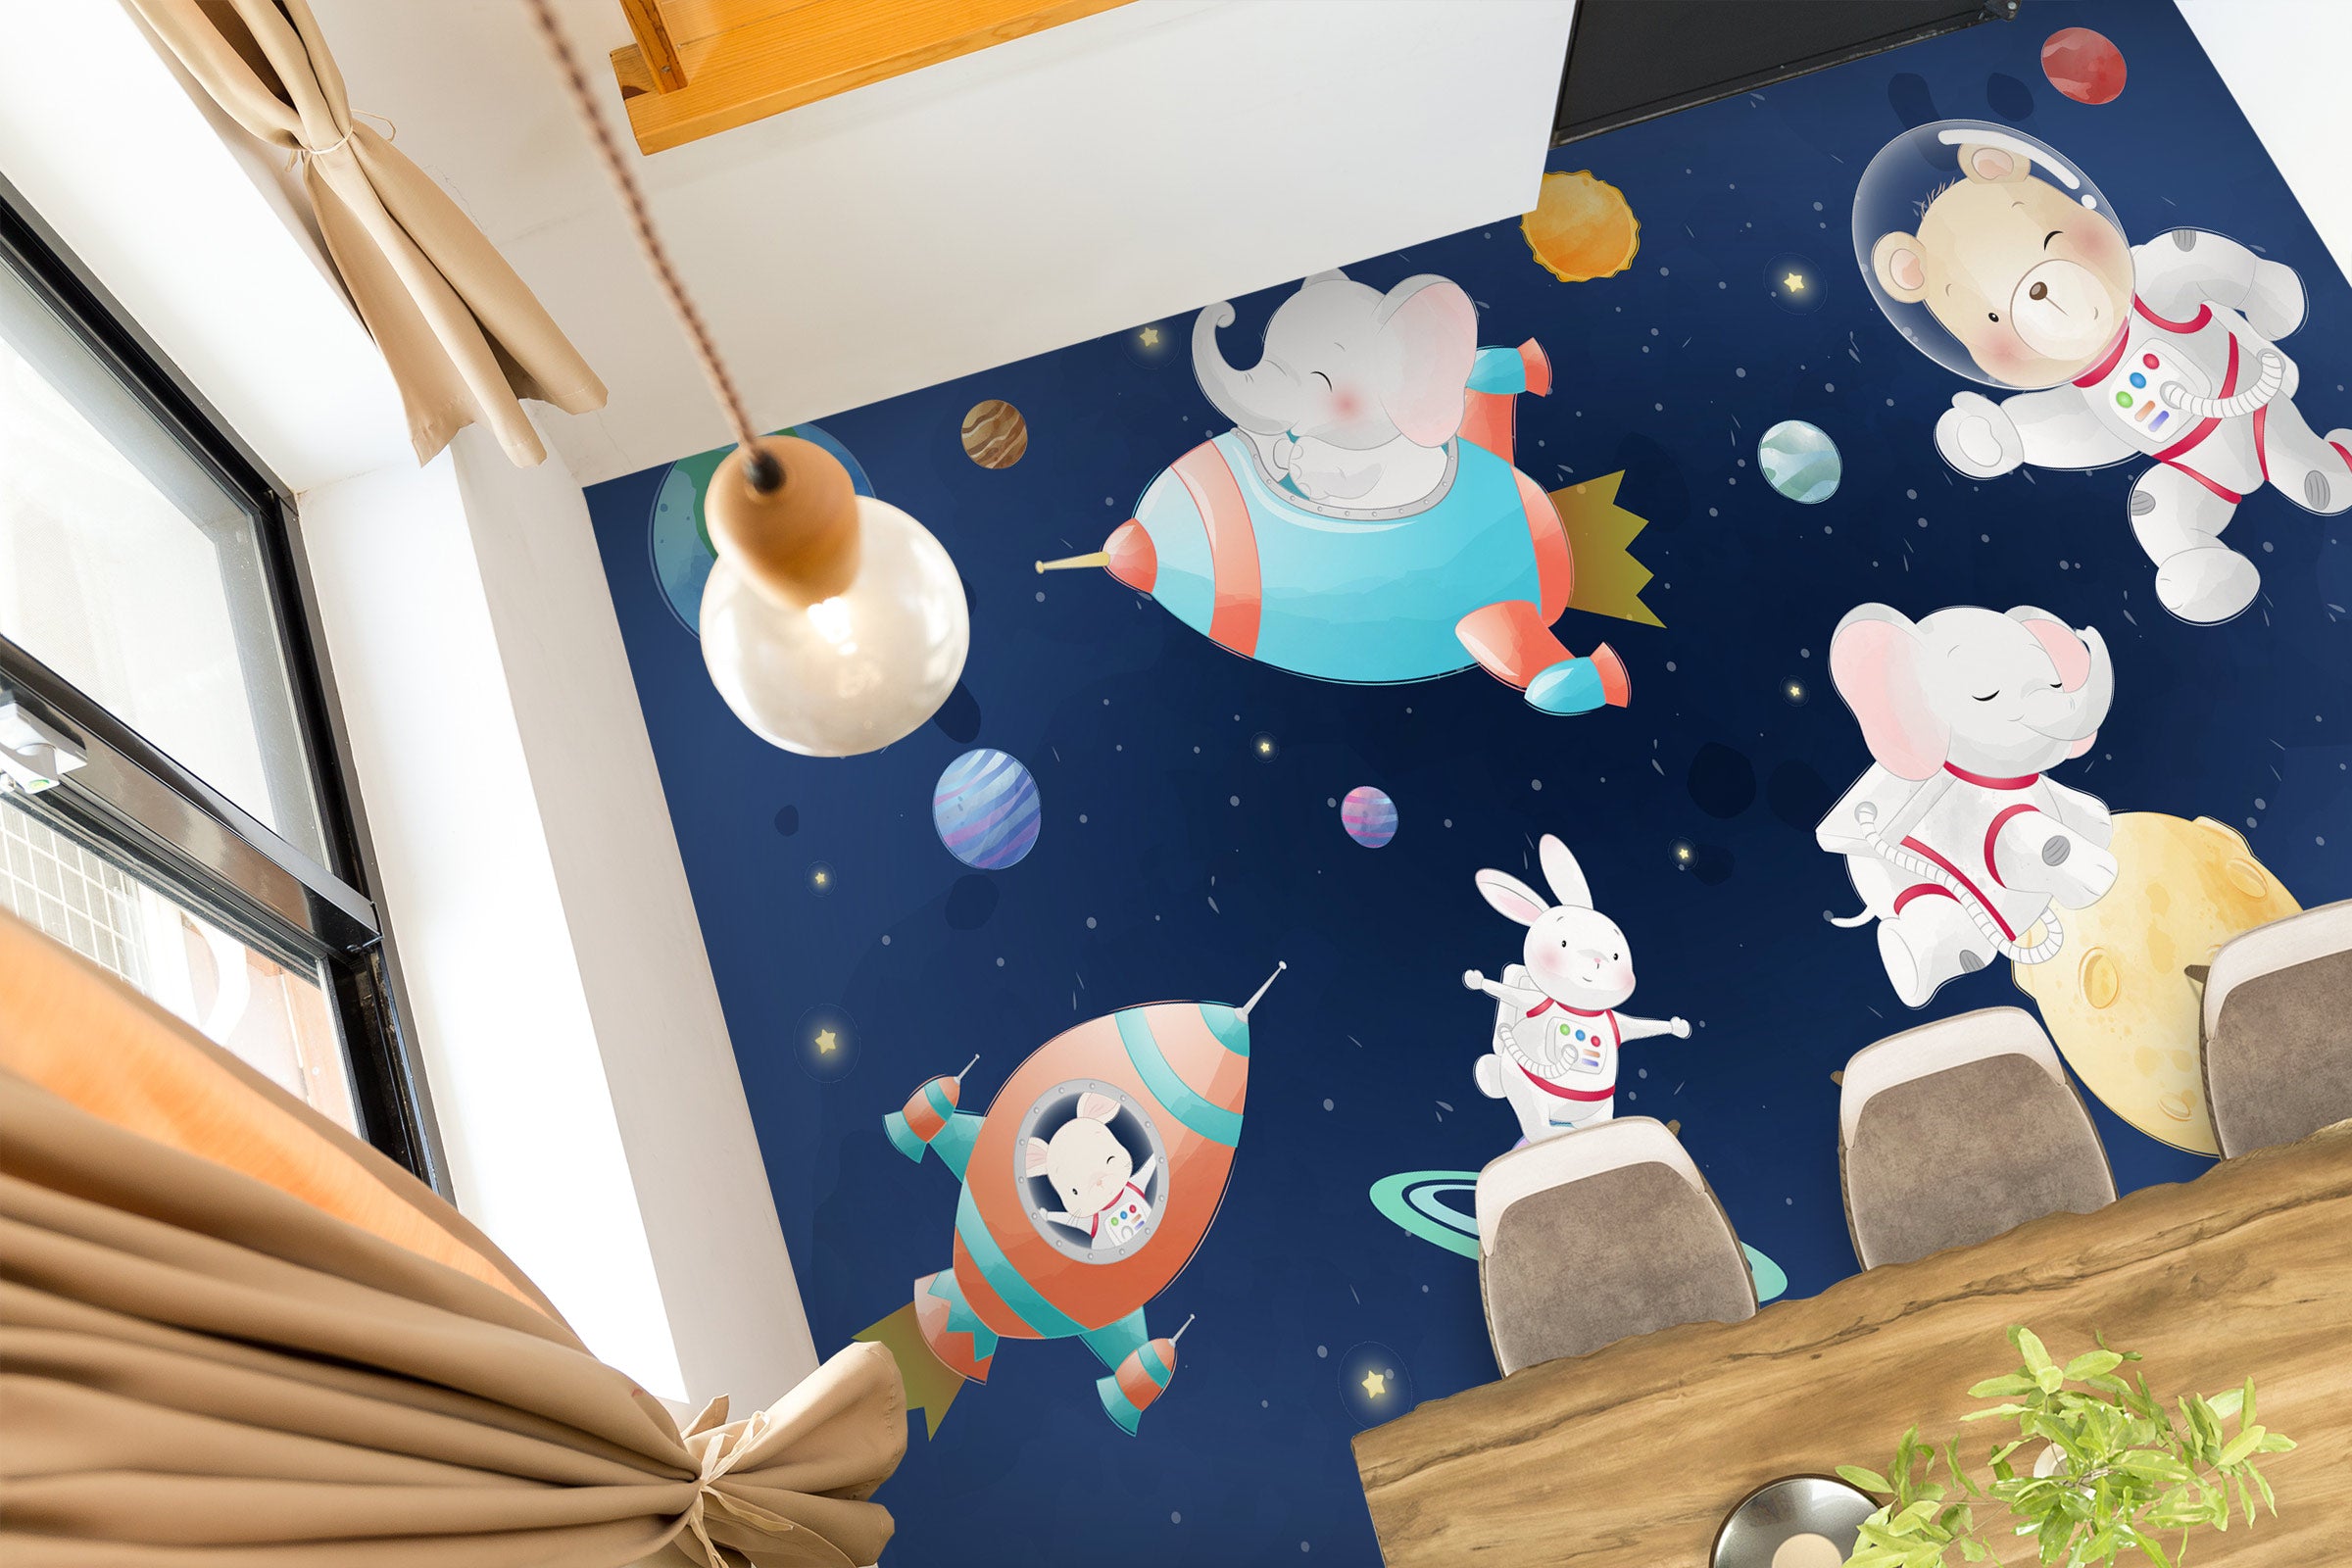 3D Space Animals 1125 Floor Mural  Wallpaper Murals Self-Adhesive Removable Print Epoxy